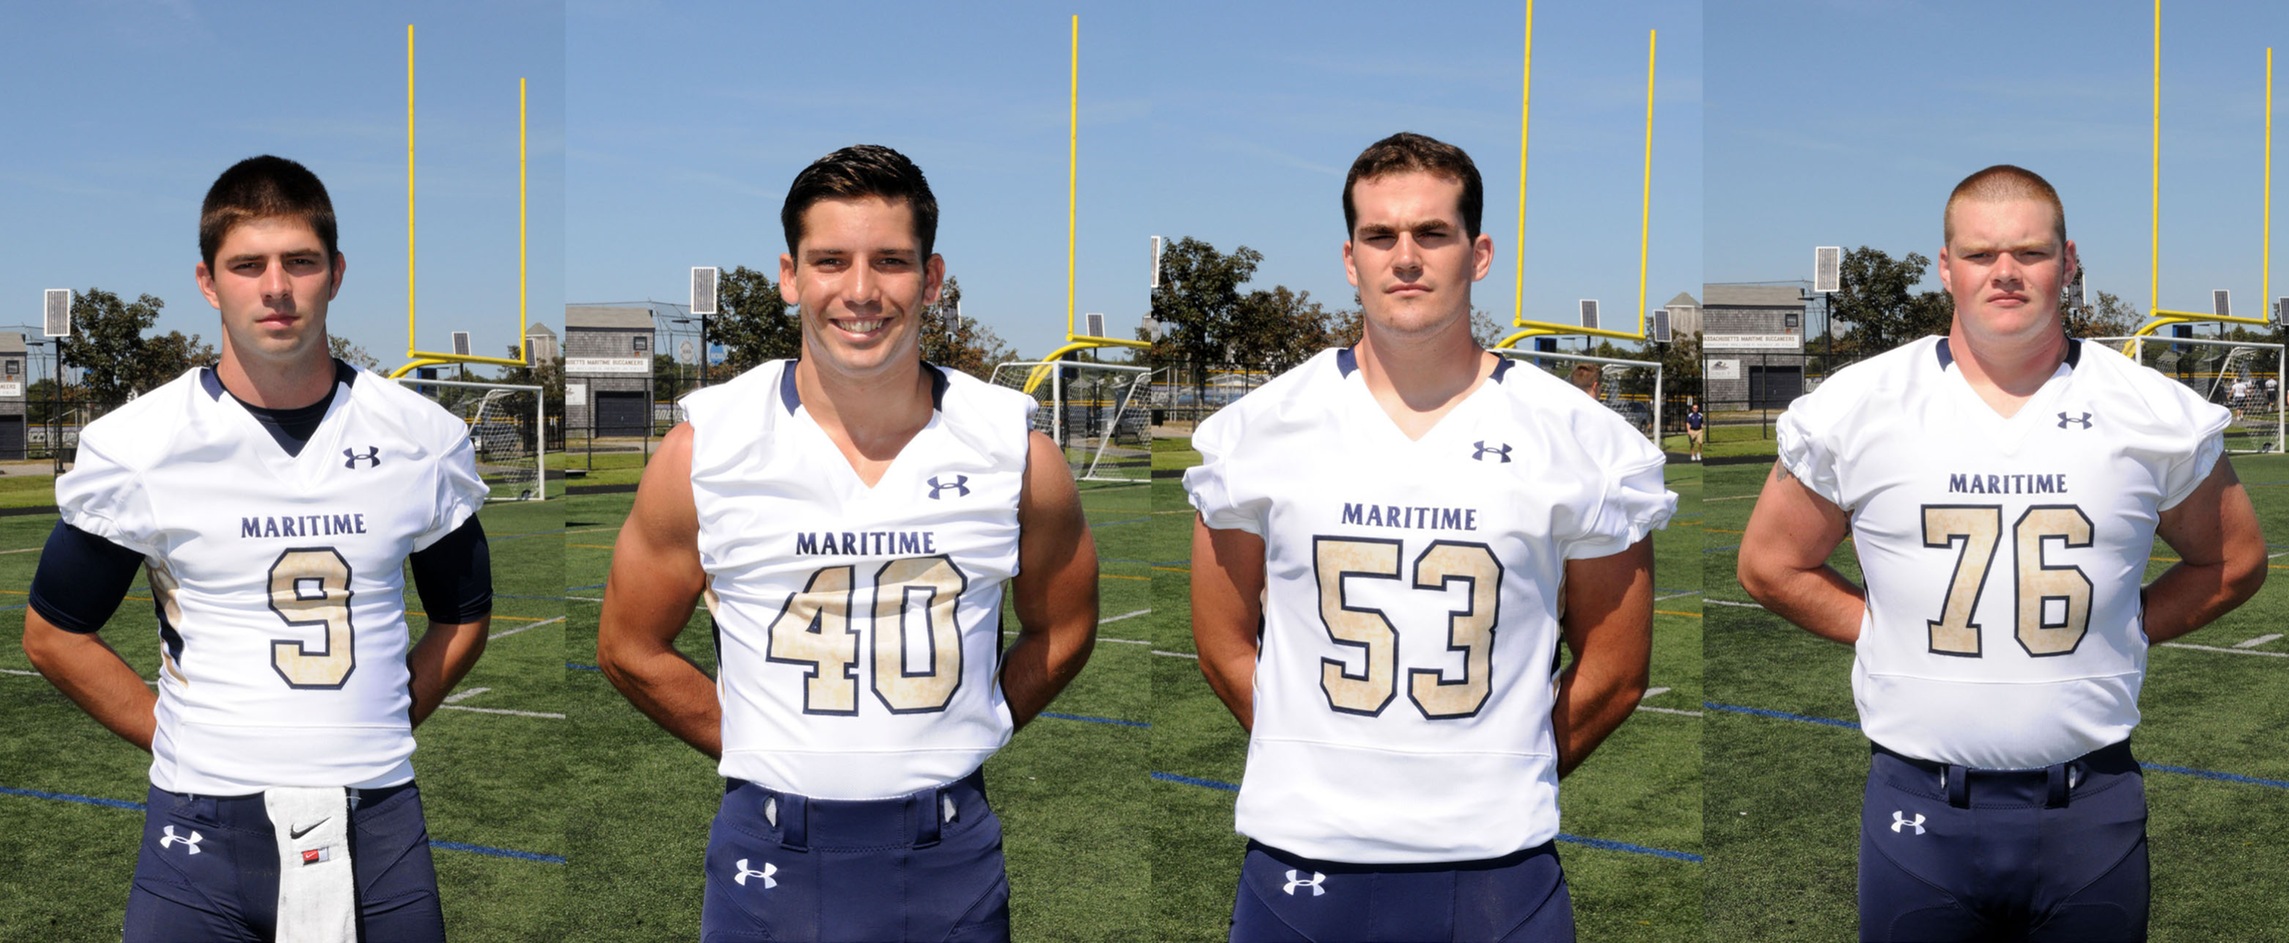 Haggerty, Gross, Churchill & Rooney Named As 2017 Buccaneer Football Co-Captains